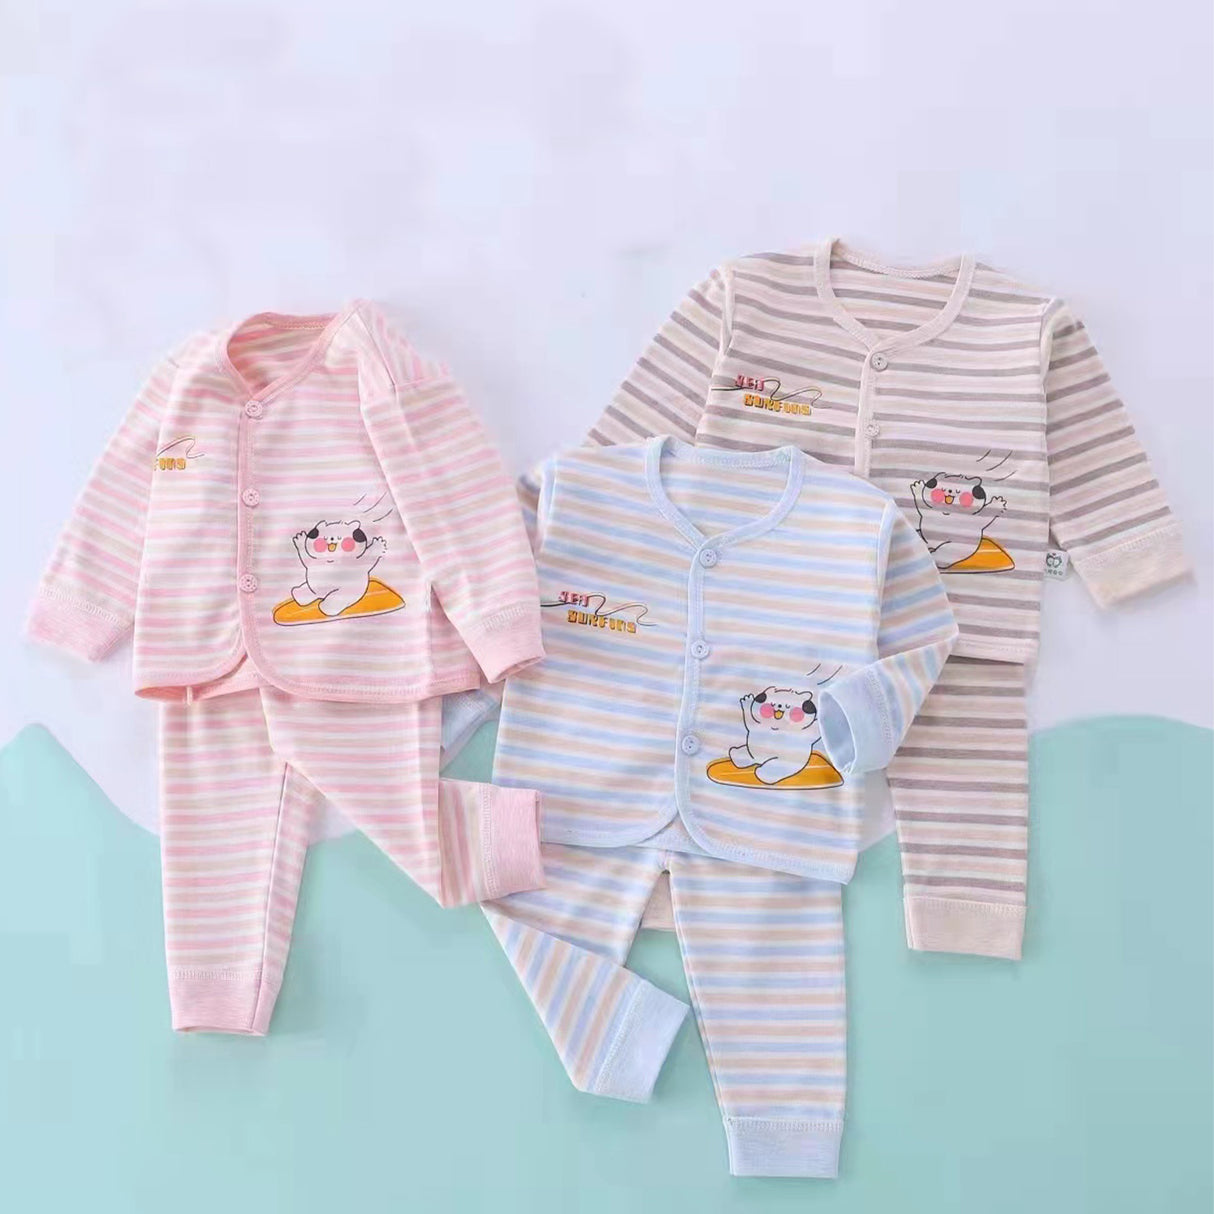 Riding Baby Bear Full Sleeves Top And Pyjama Buttoned Cotton Night Suit